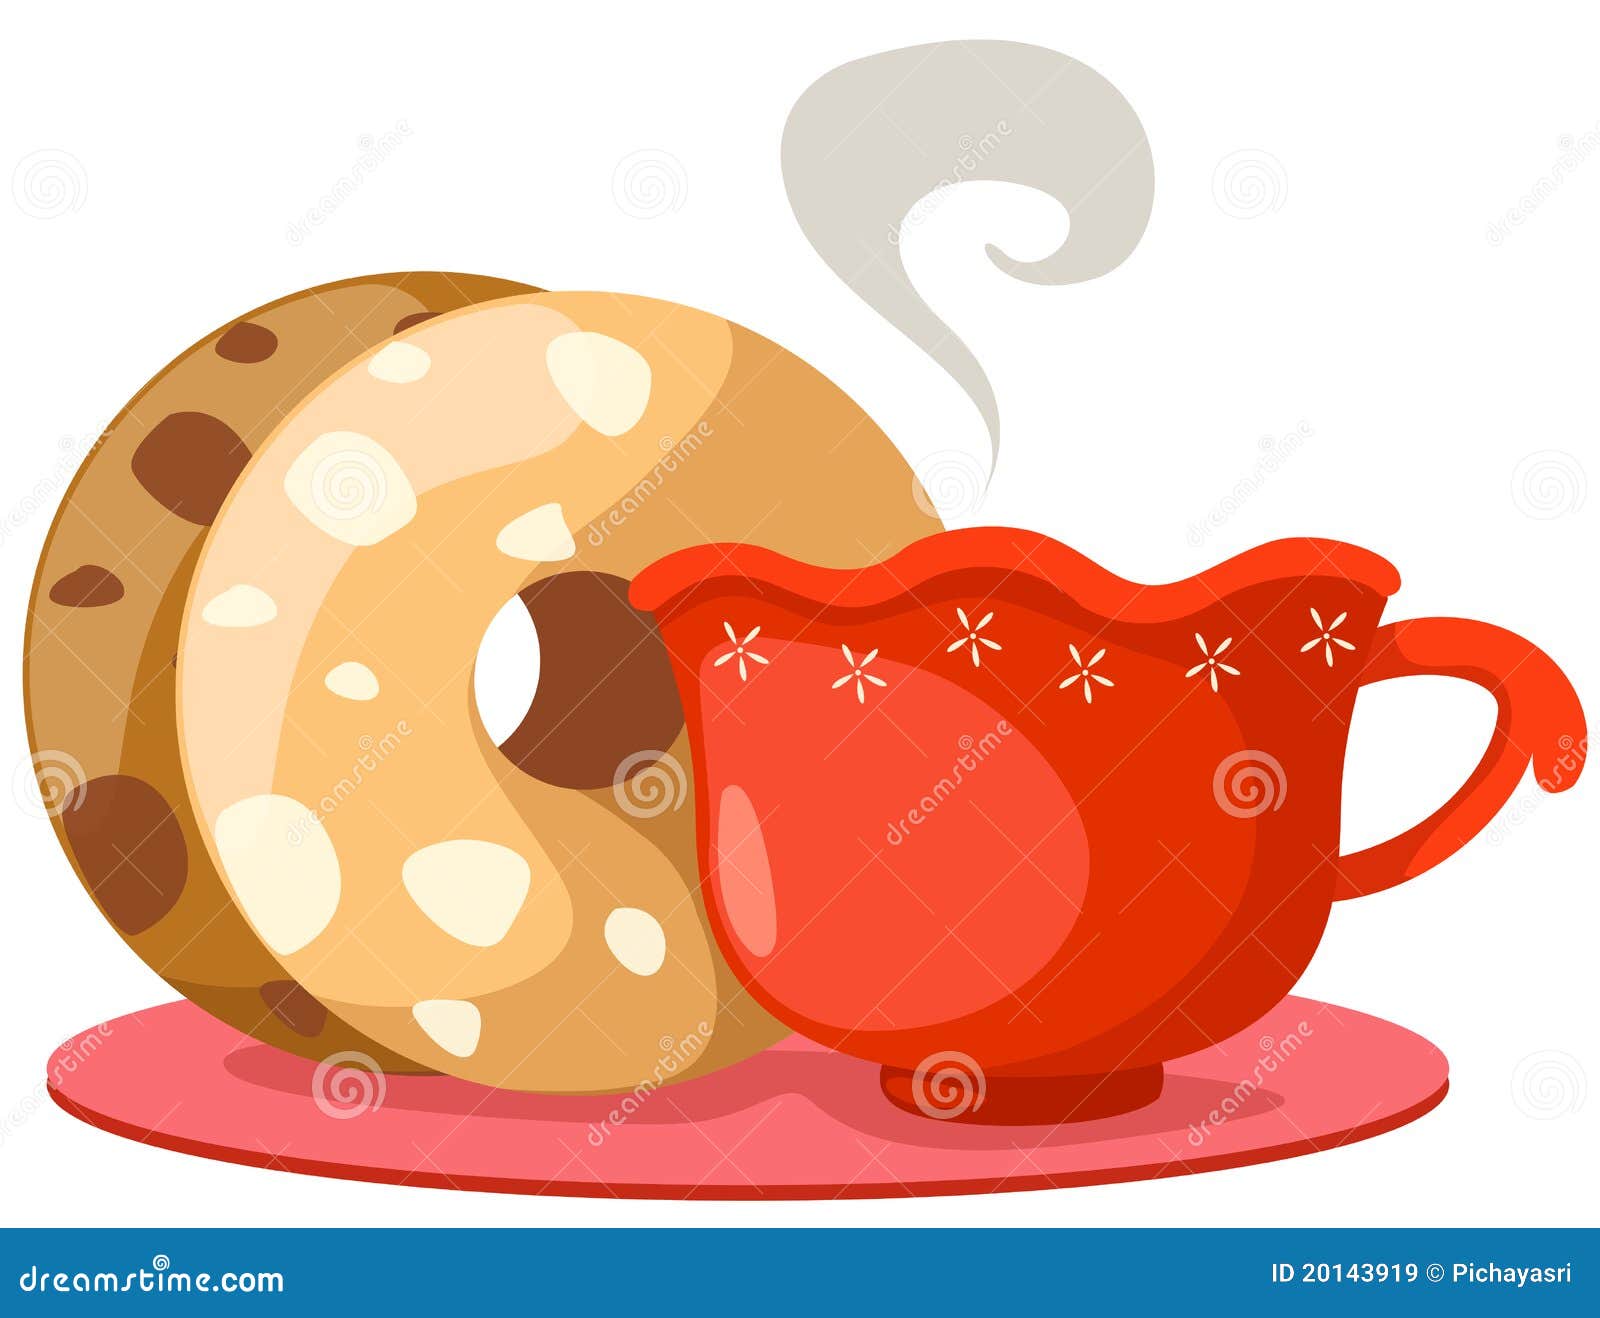 clipart coffee and donuts - photo #49